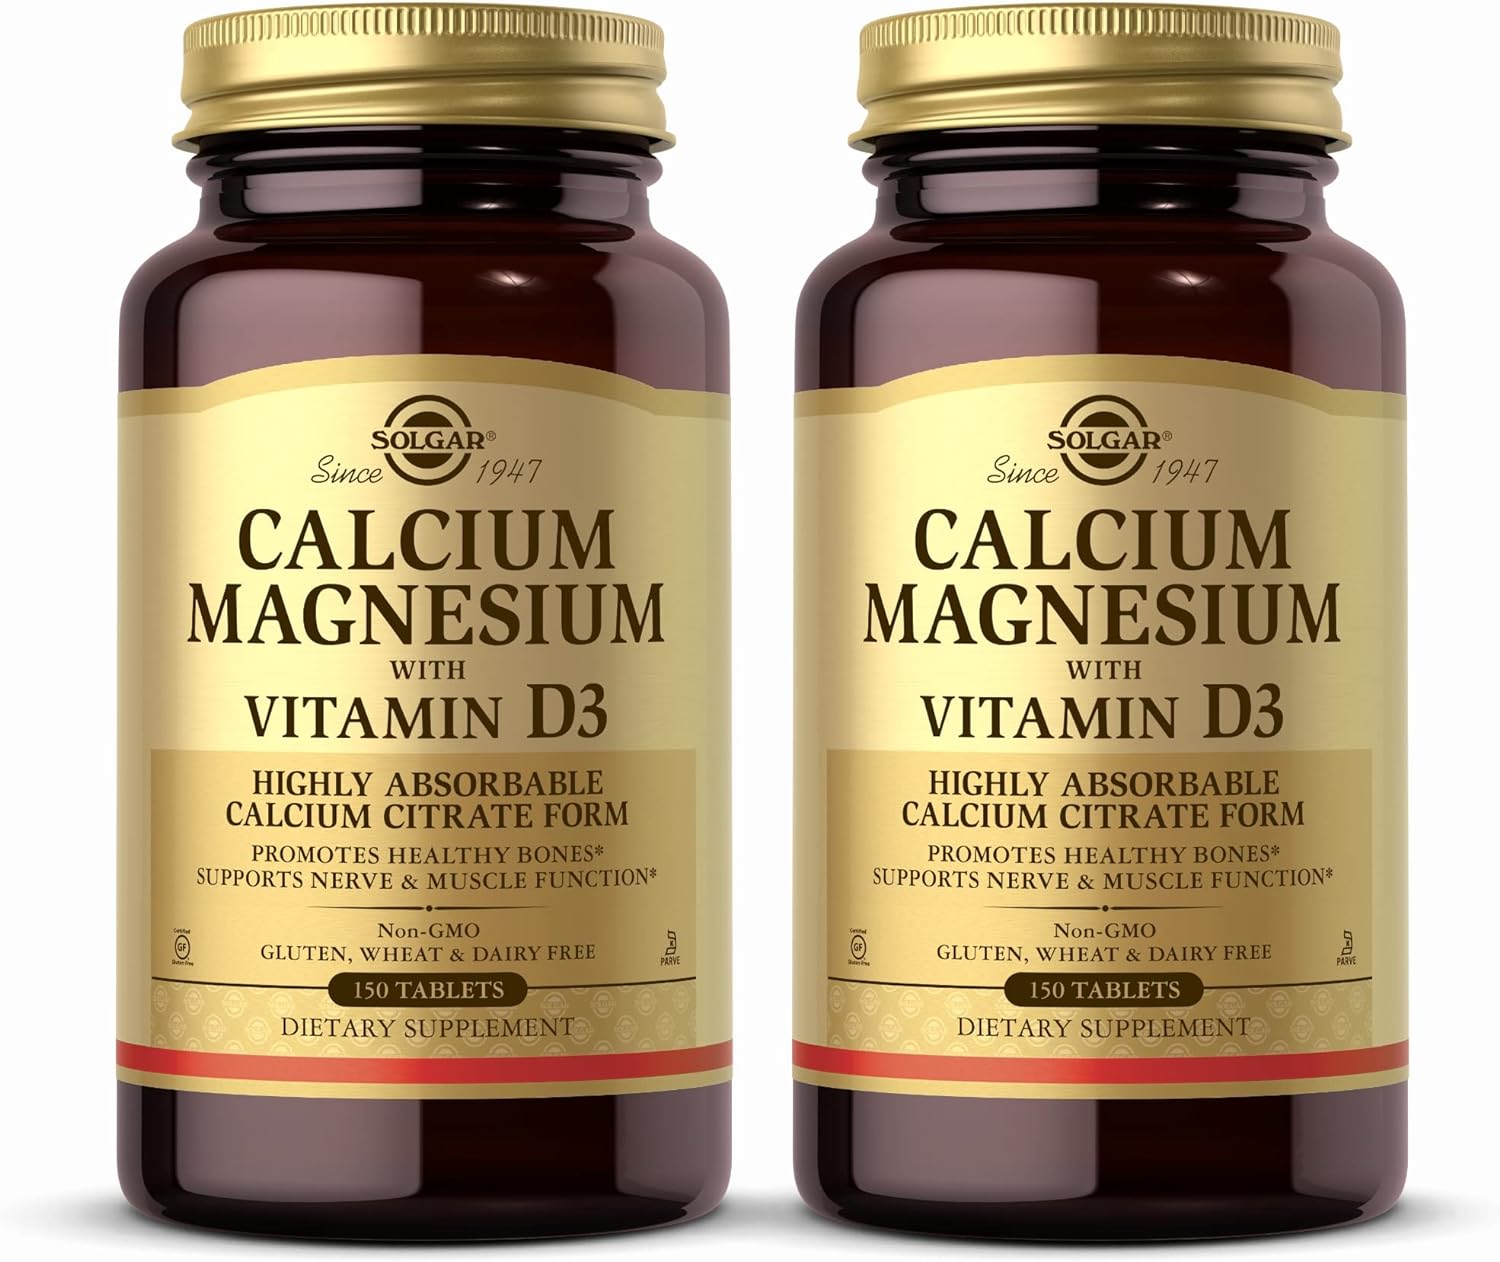 Solgar Calcium Magnesium with Vitamin D3-150 Tablets, Pack of 2 - Promotes Healthy Bones, Supports Nerve & Muscle Functi